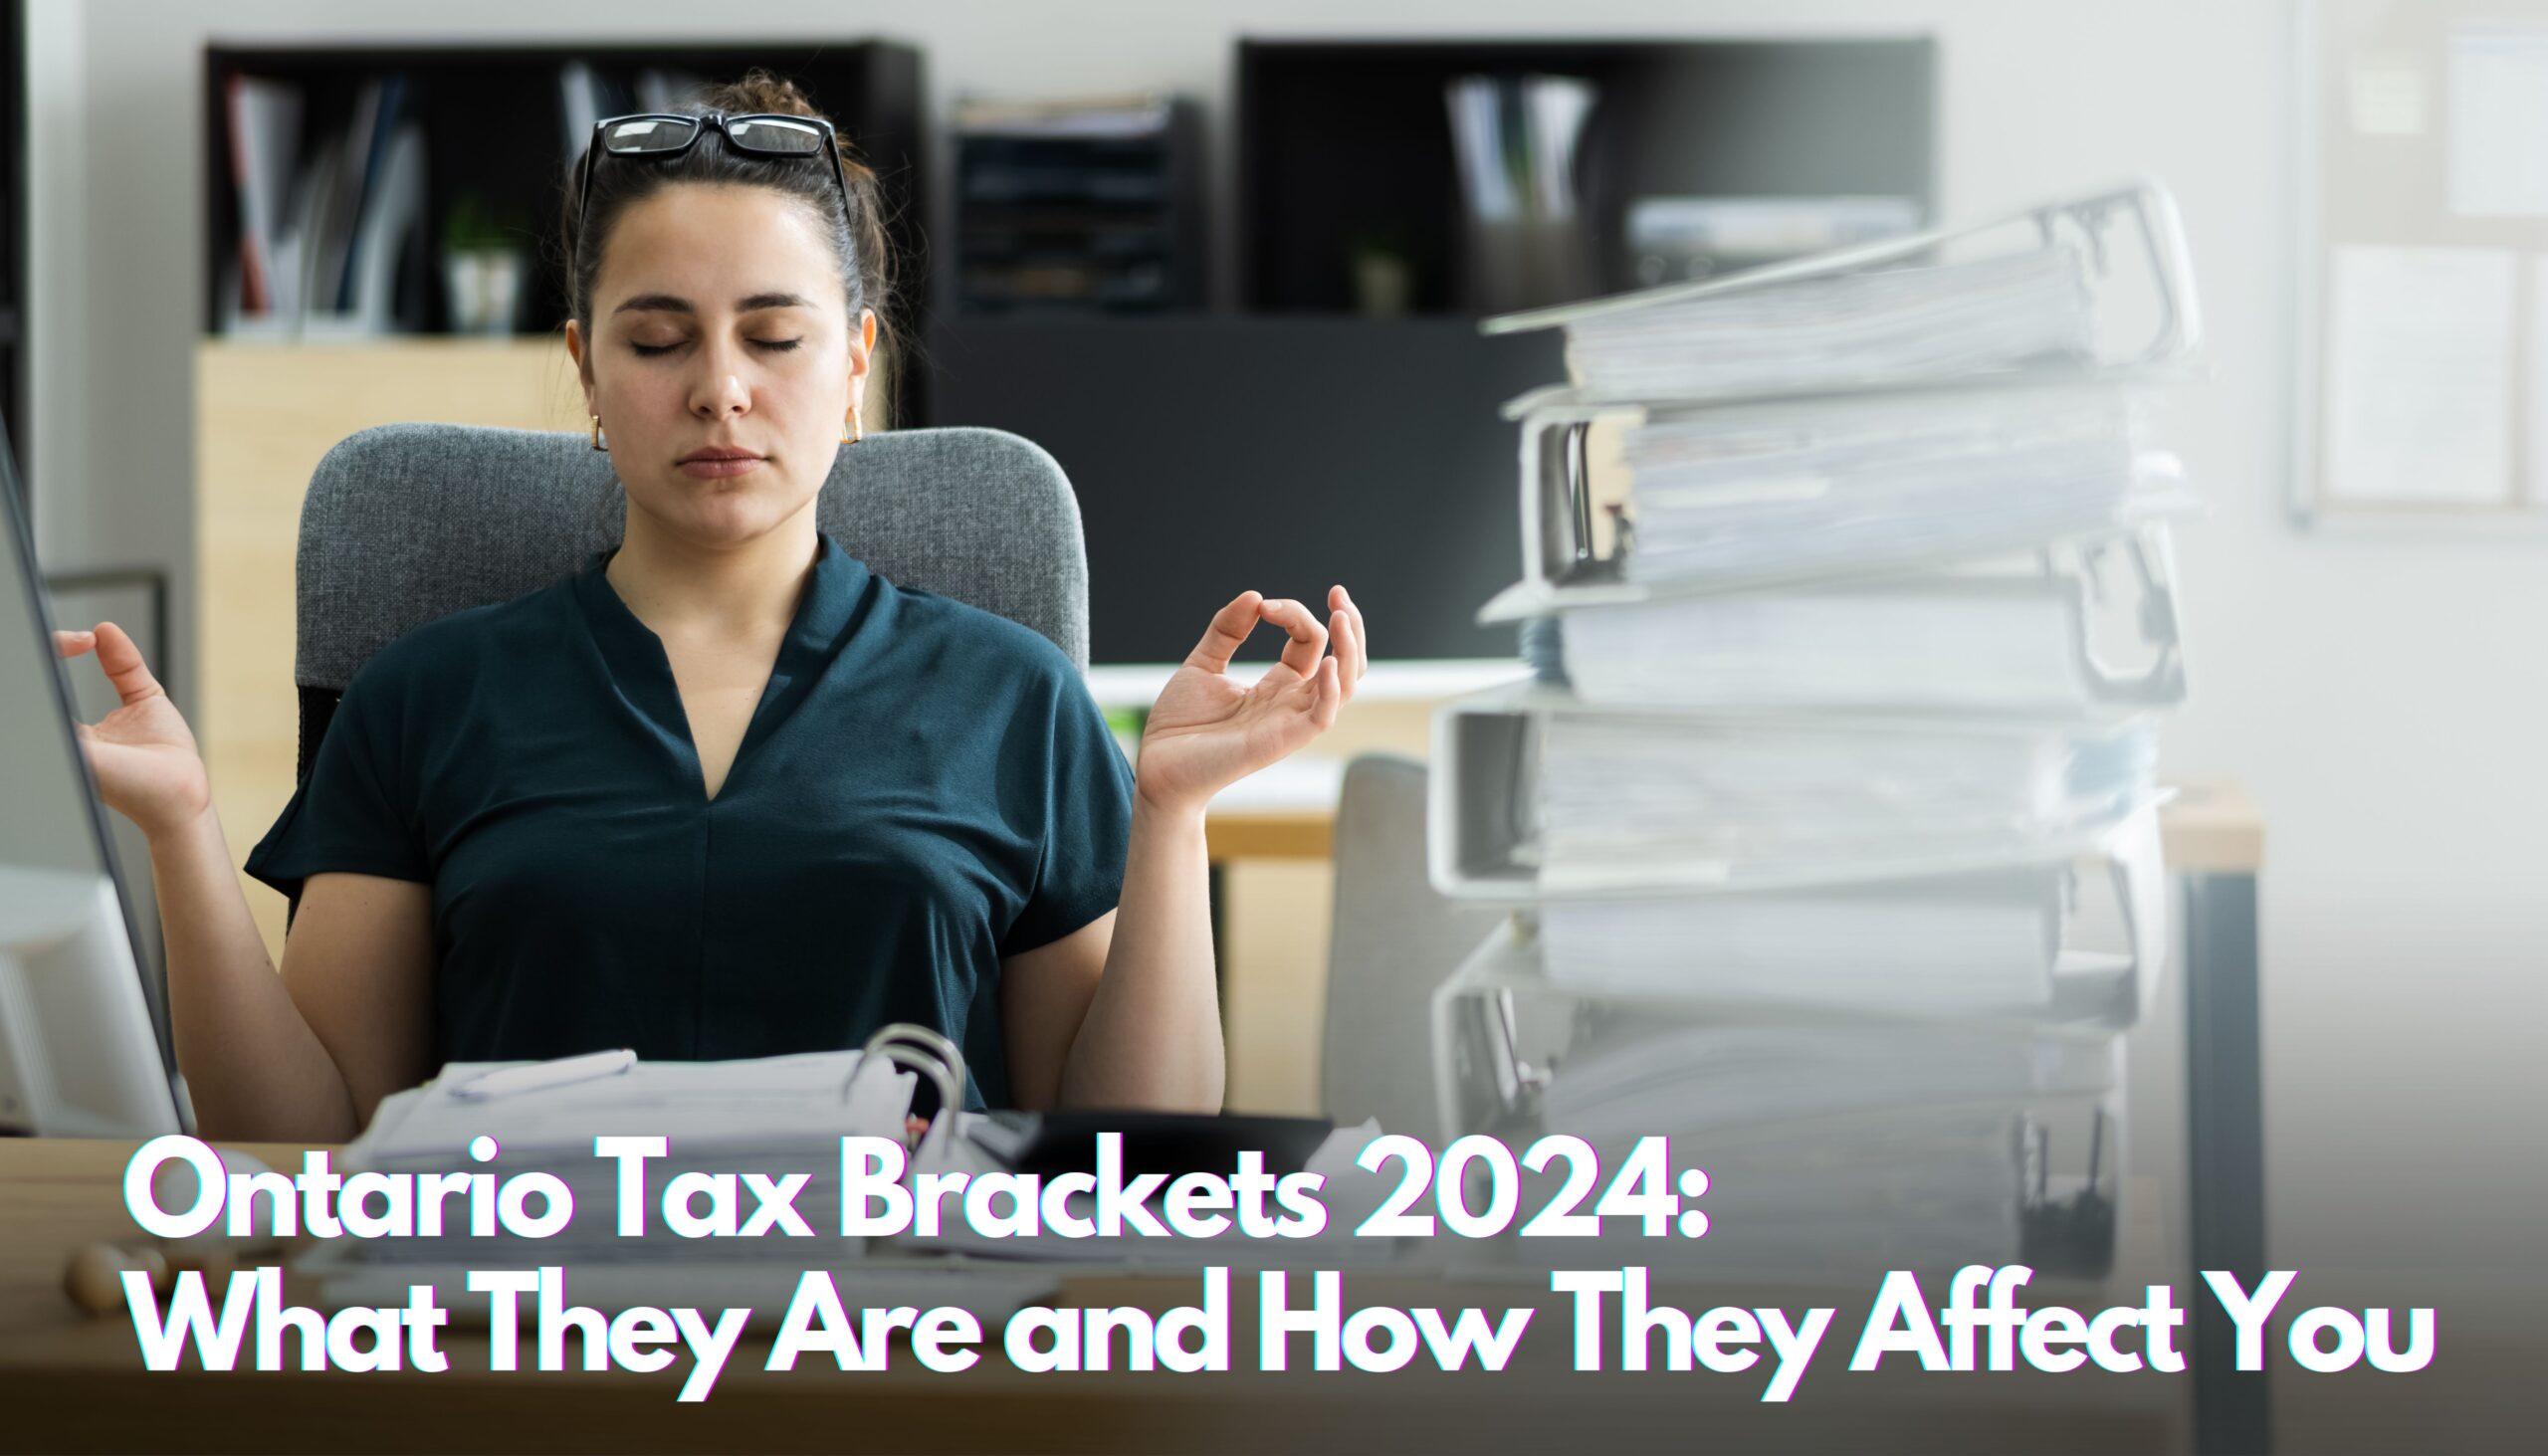 Ontario Tax Brackets 2024 What They Are and How They Affect